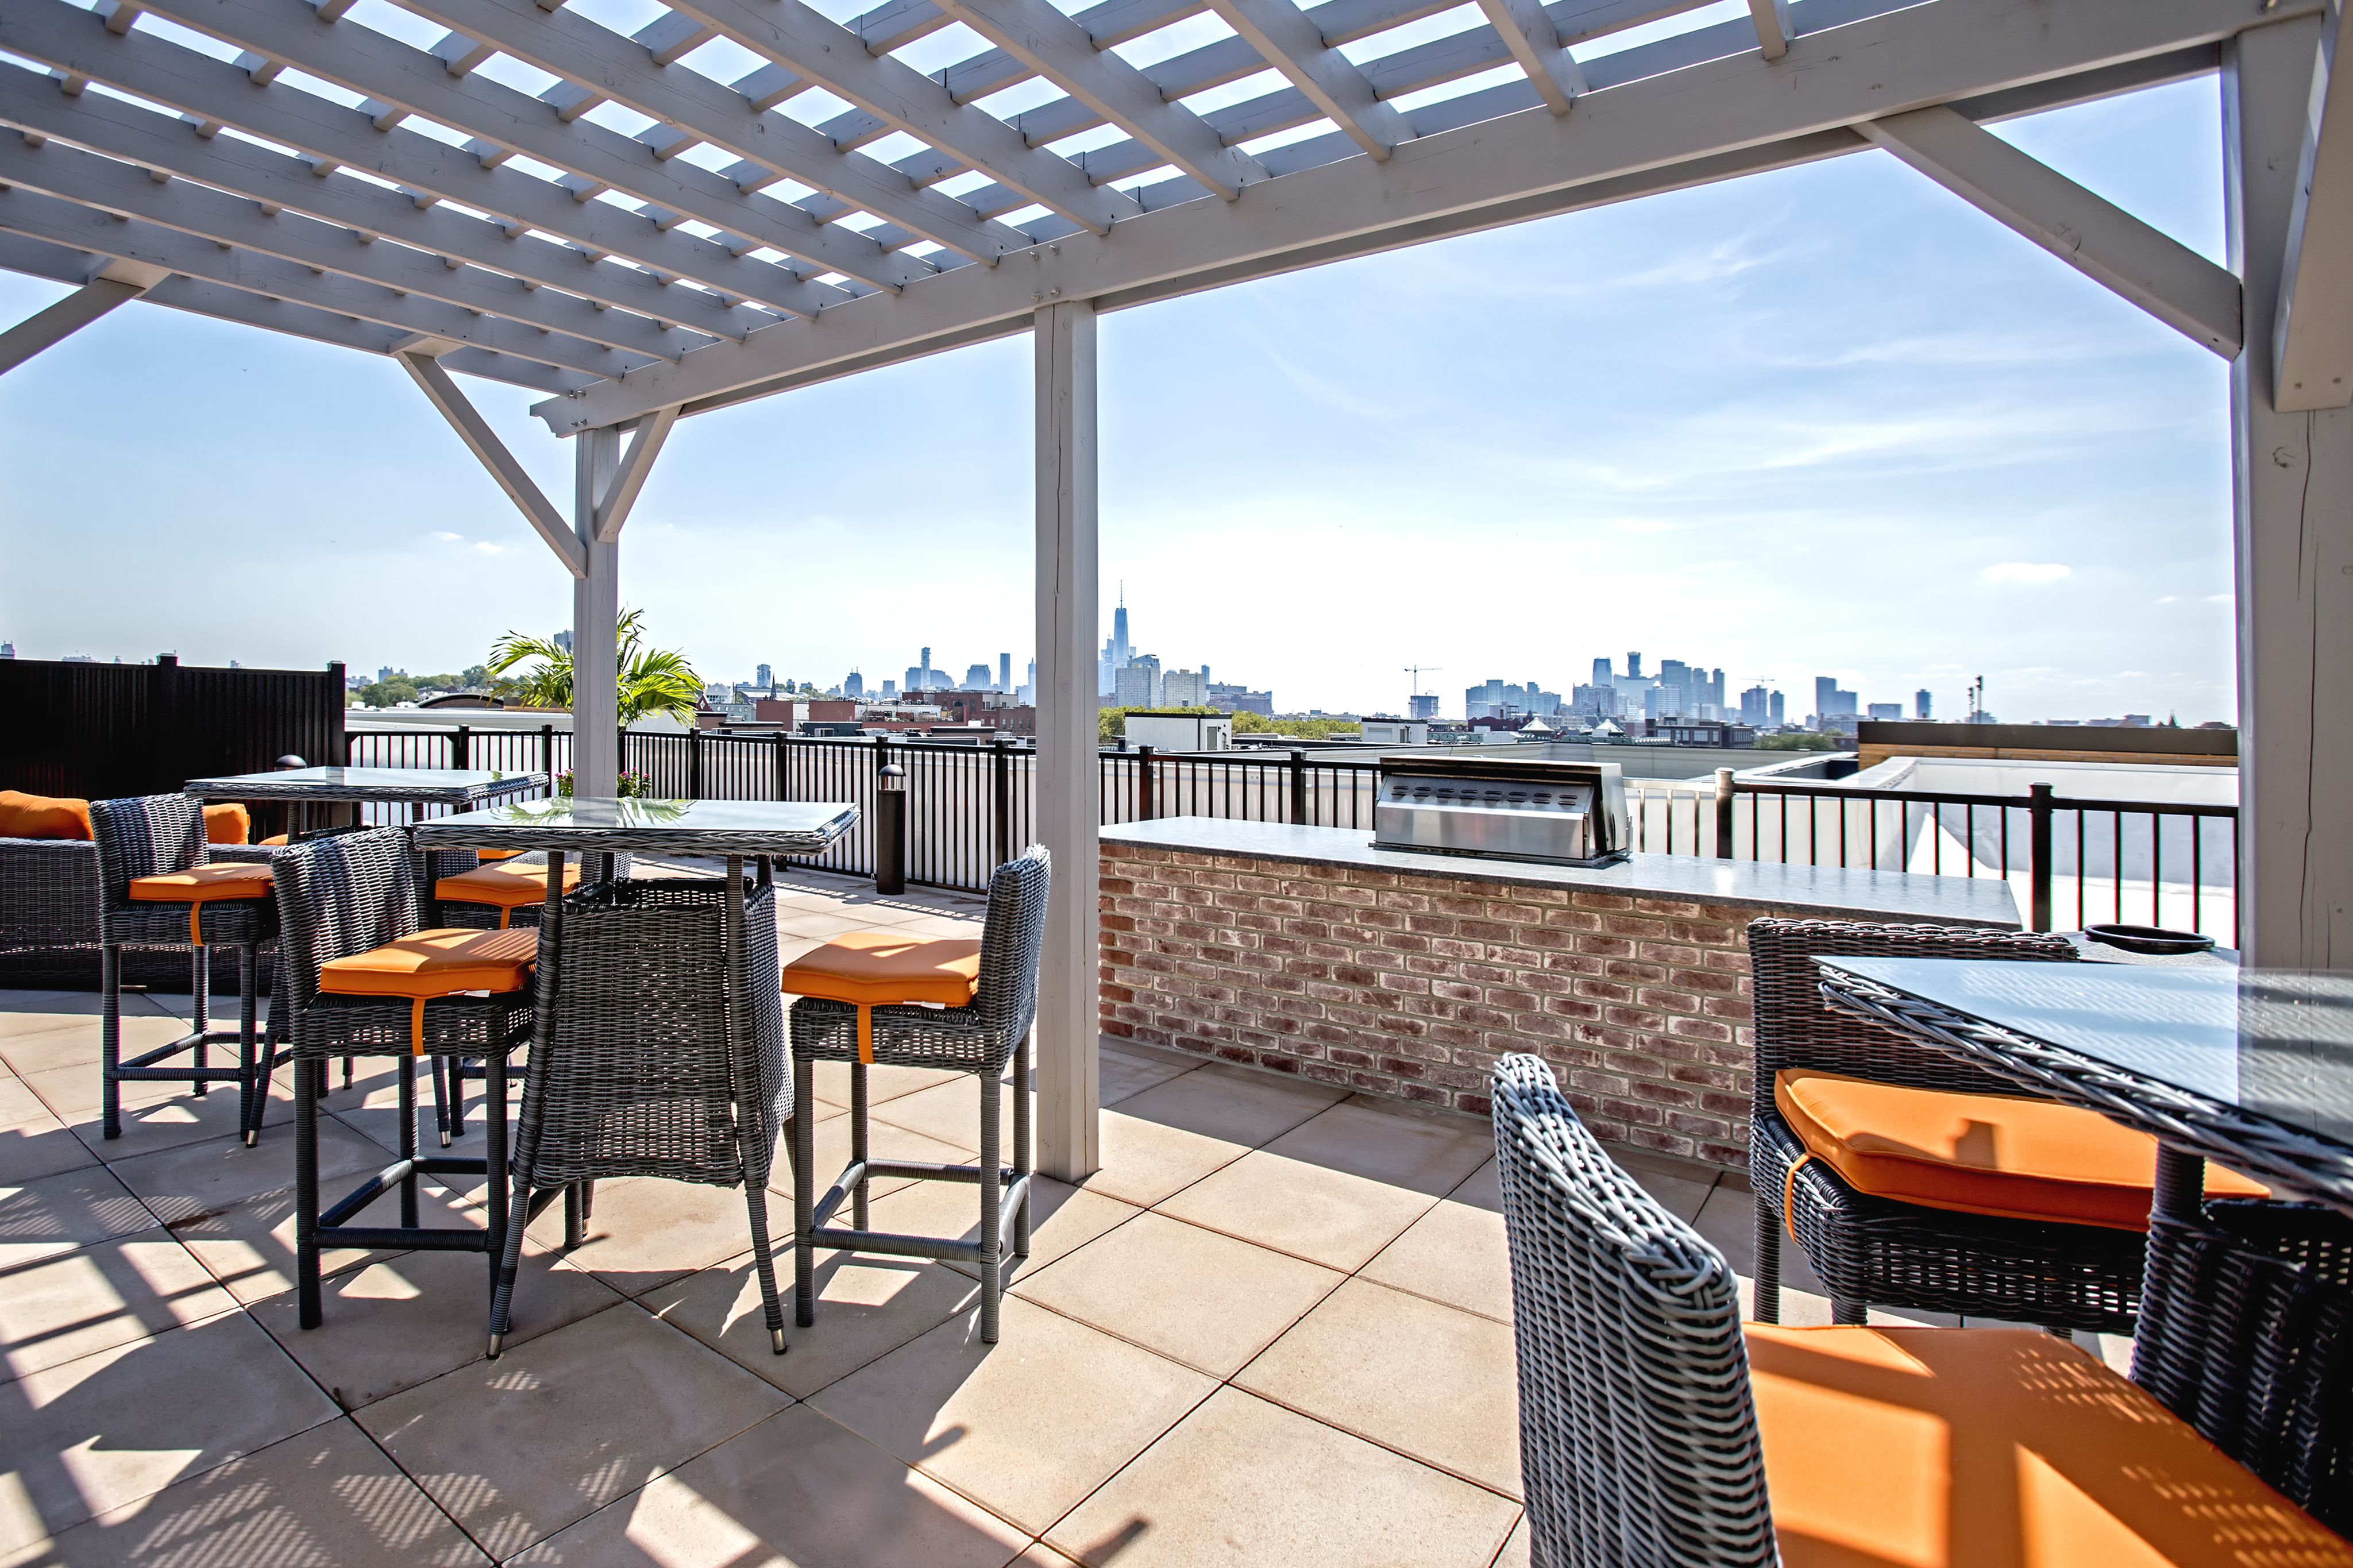 Roof Top Lounge Area with Grill